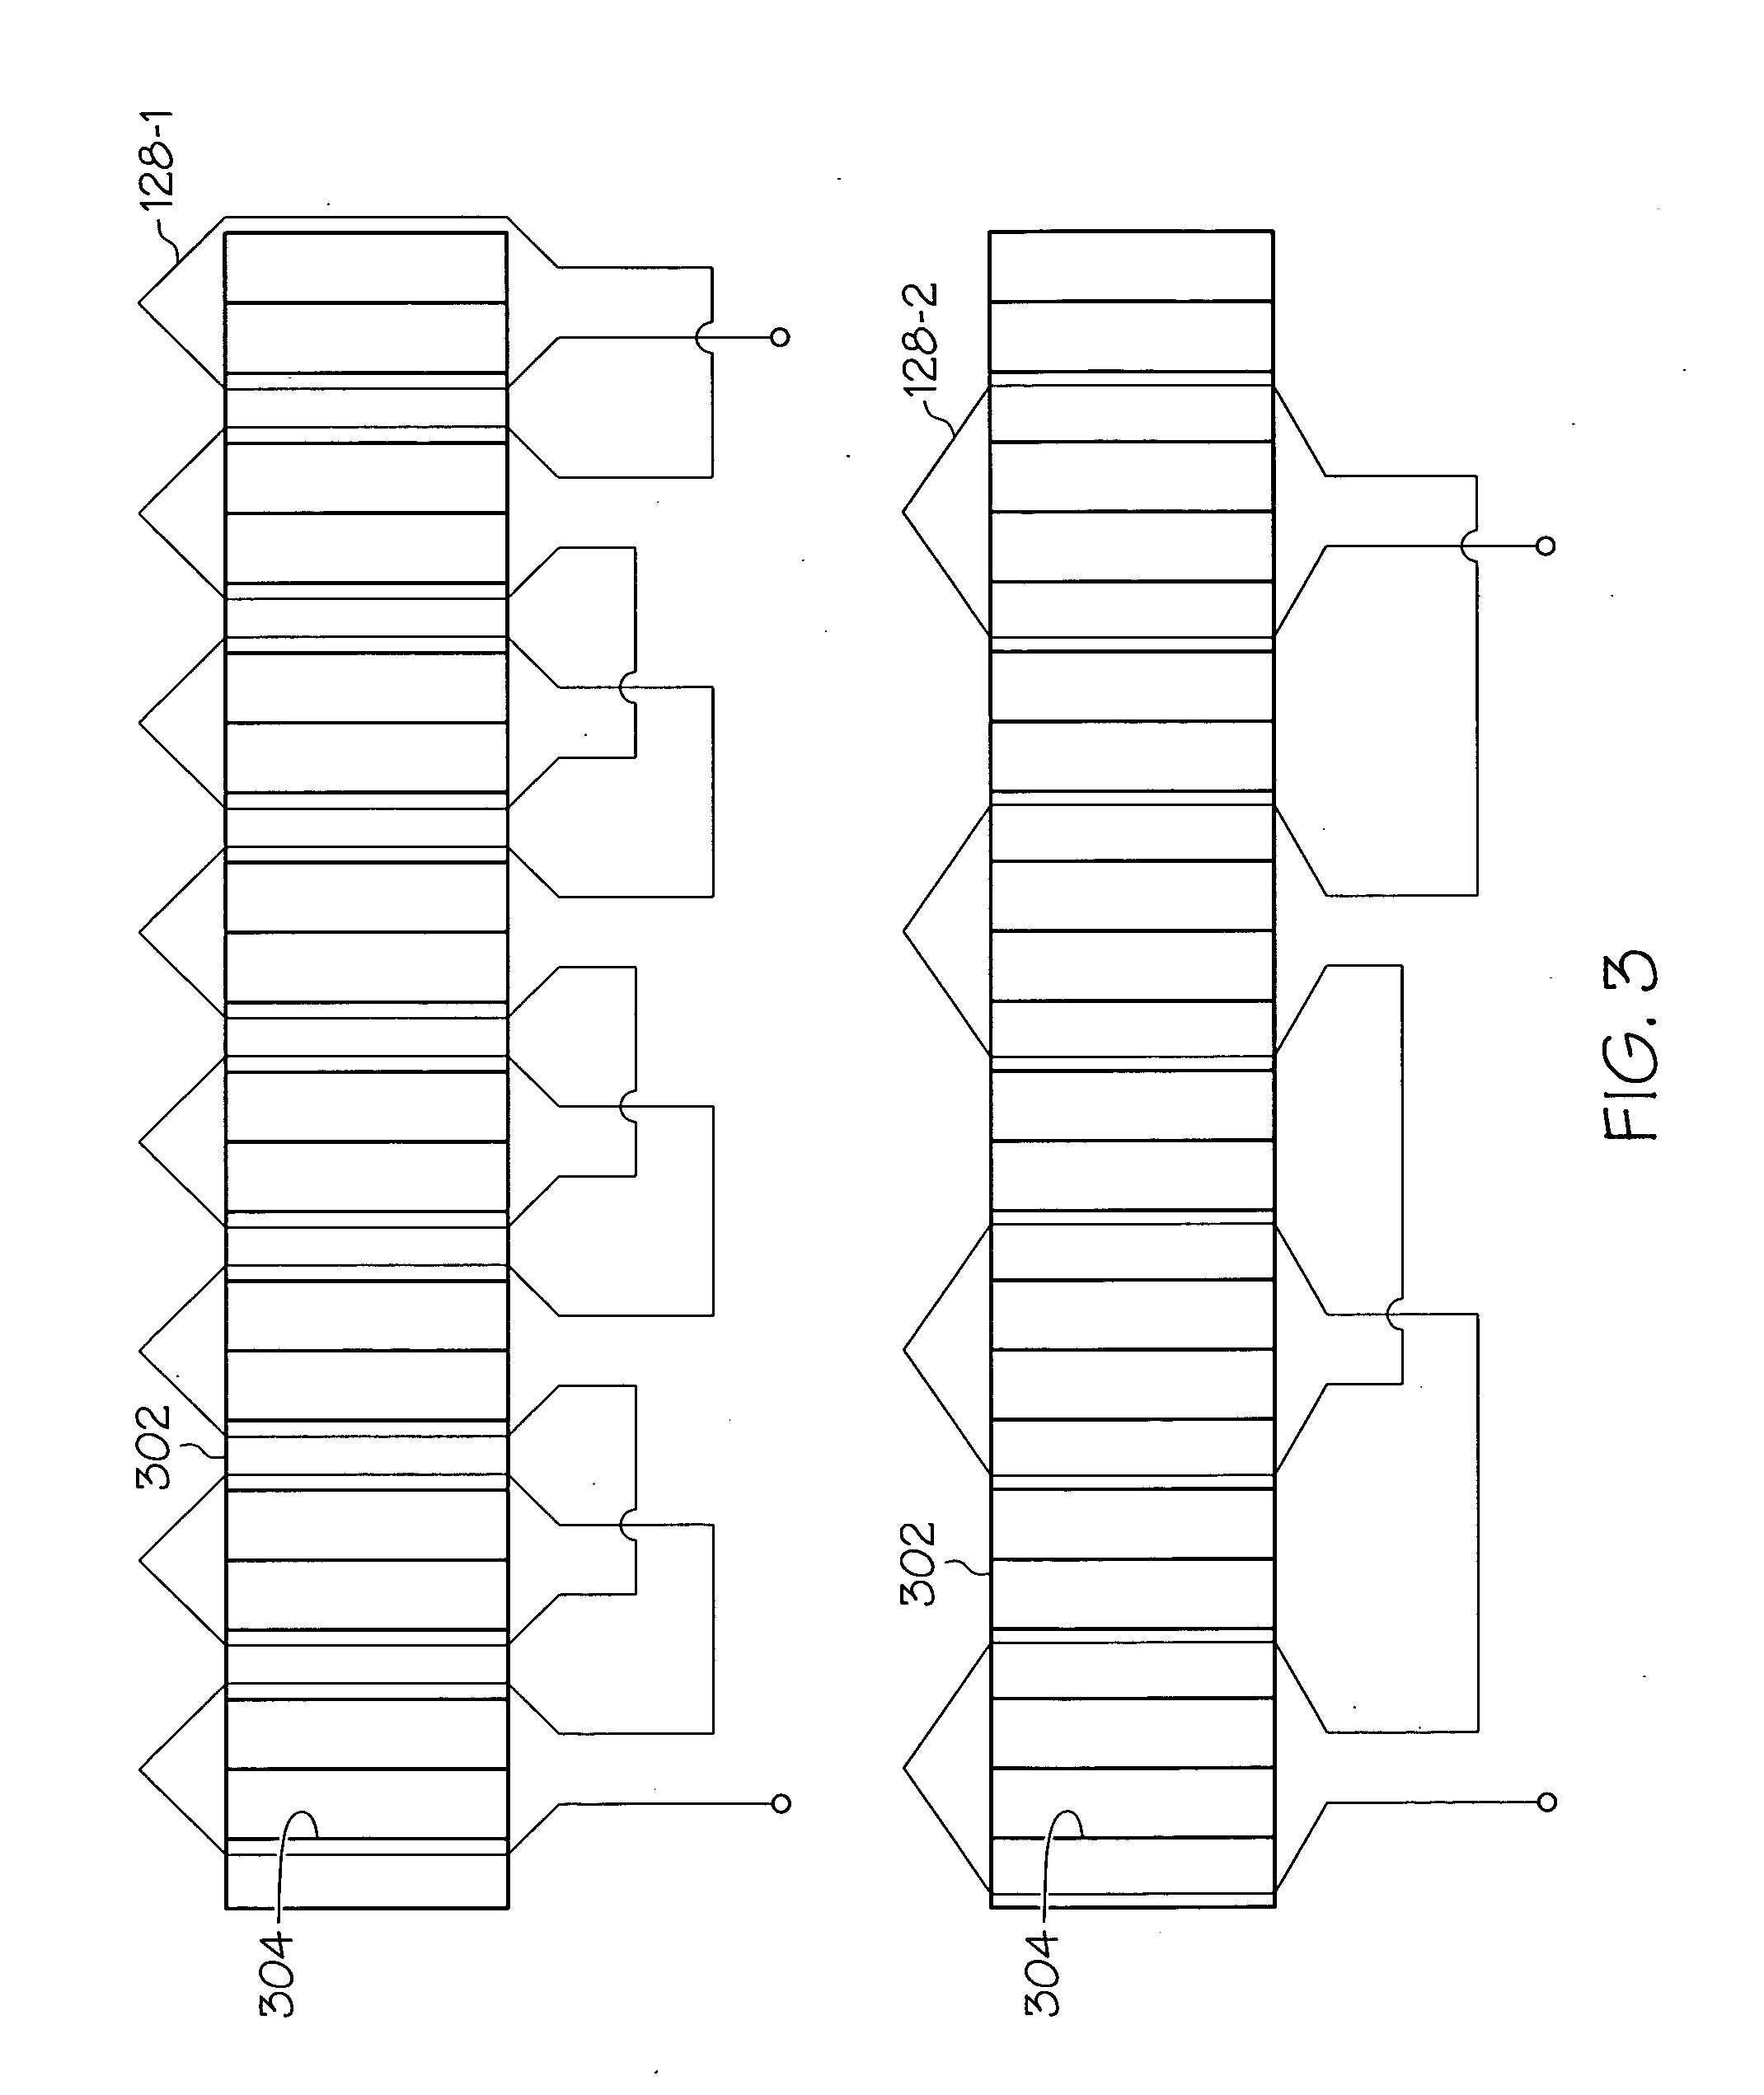 Starter-generator operable with multiple variable frequencies and voltages